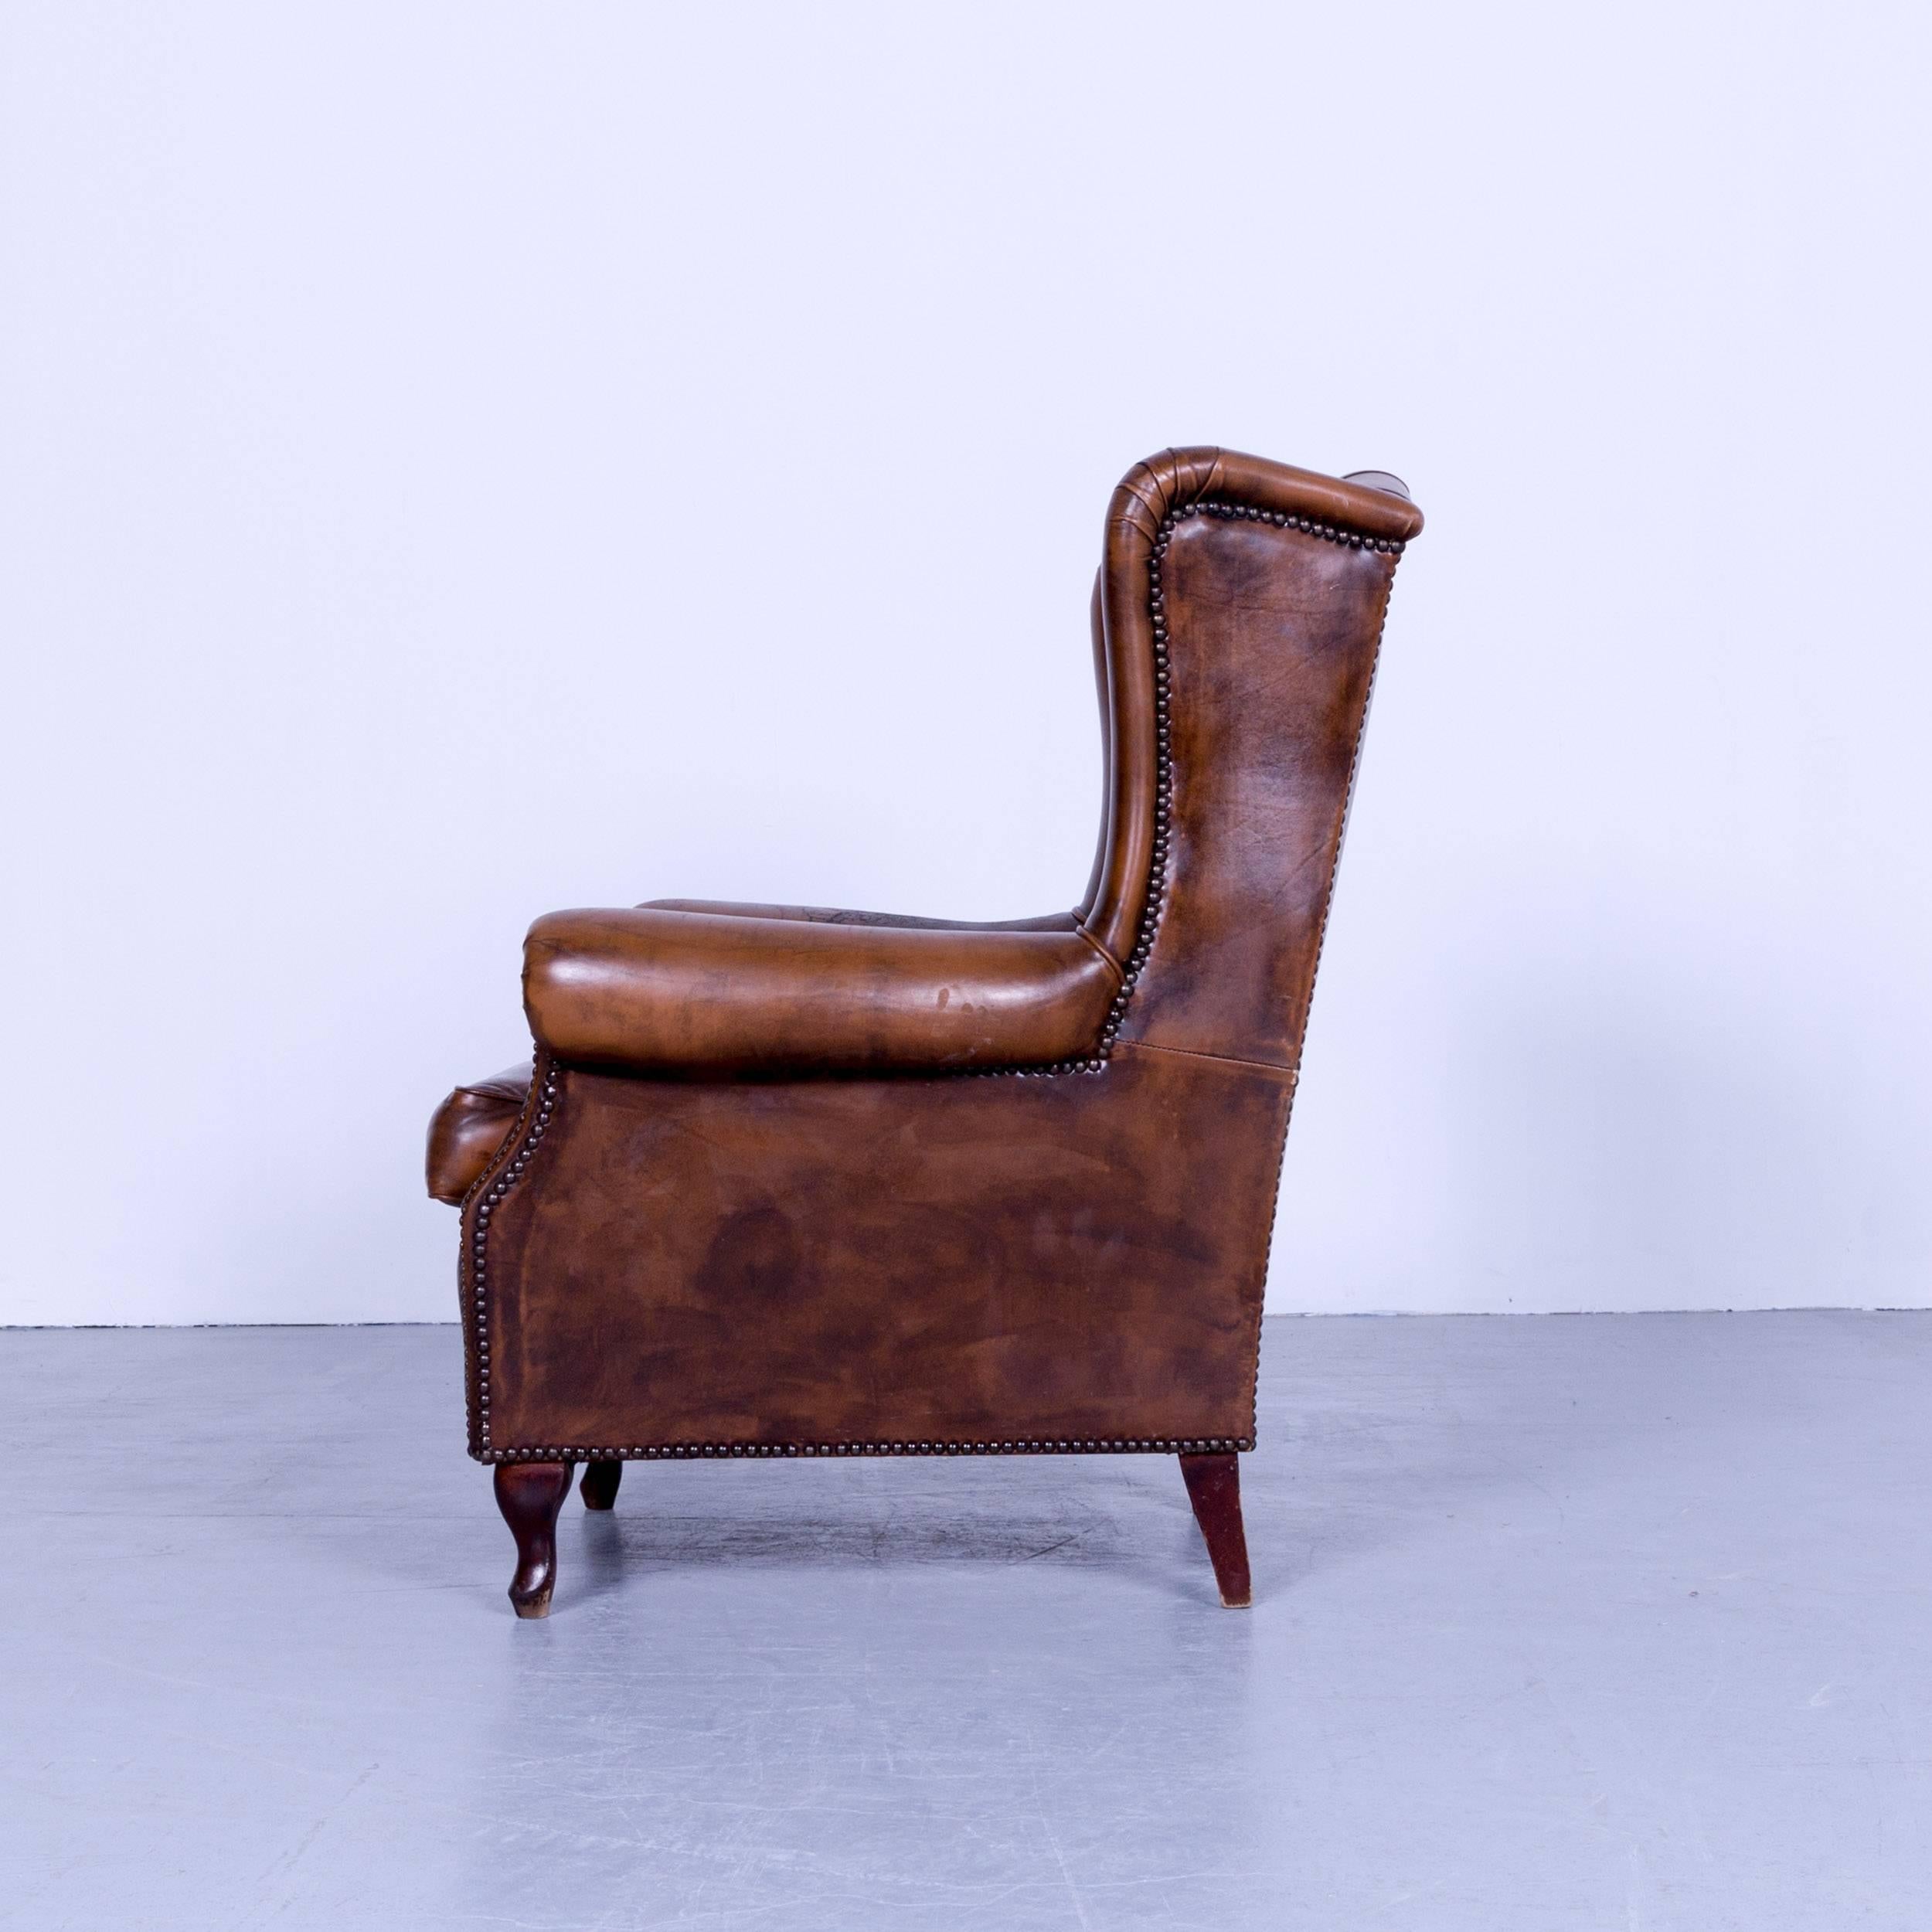 Chesterfield Armchair Brown Cocker Leather Buttoned Vintage Retro Wood Handmade For Sale 4